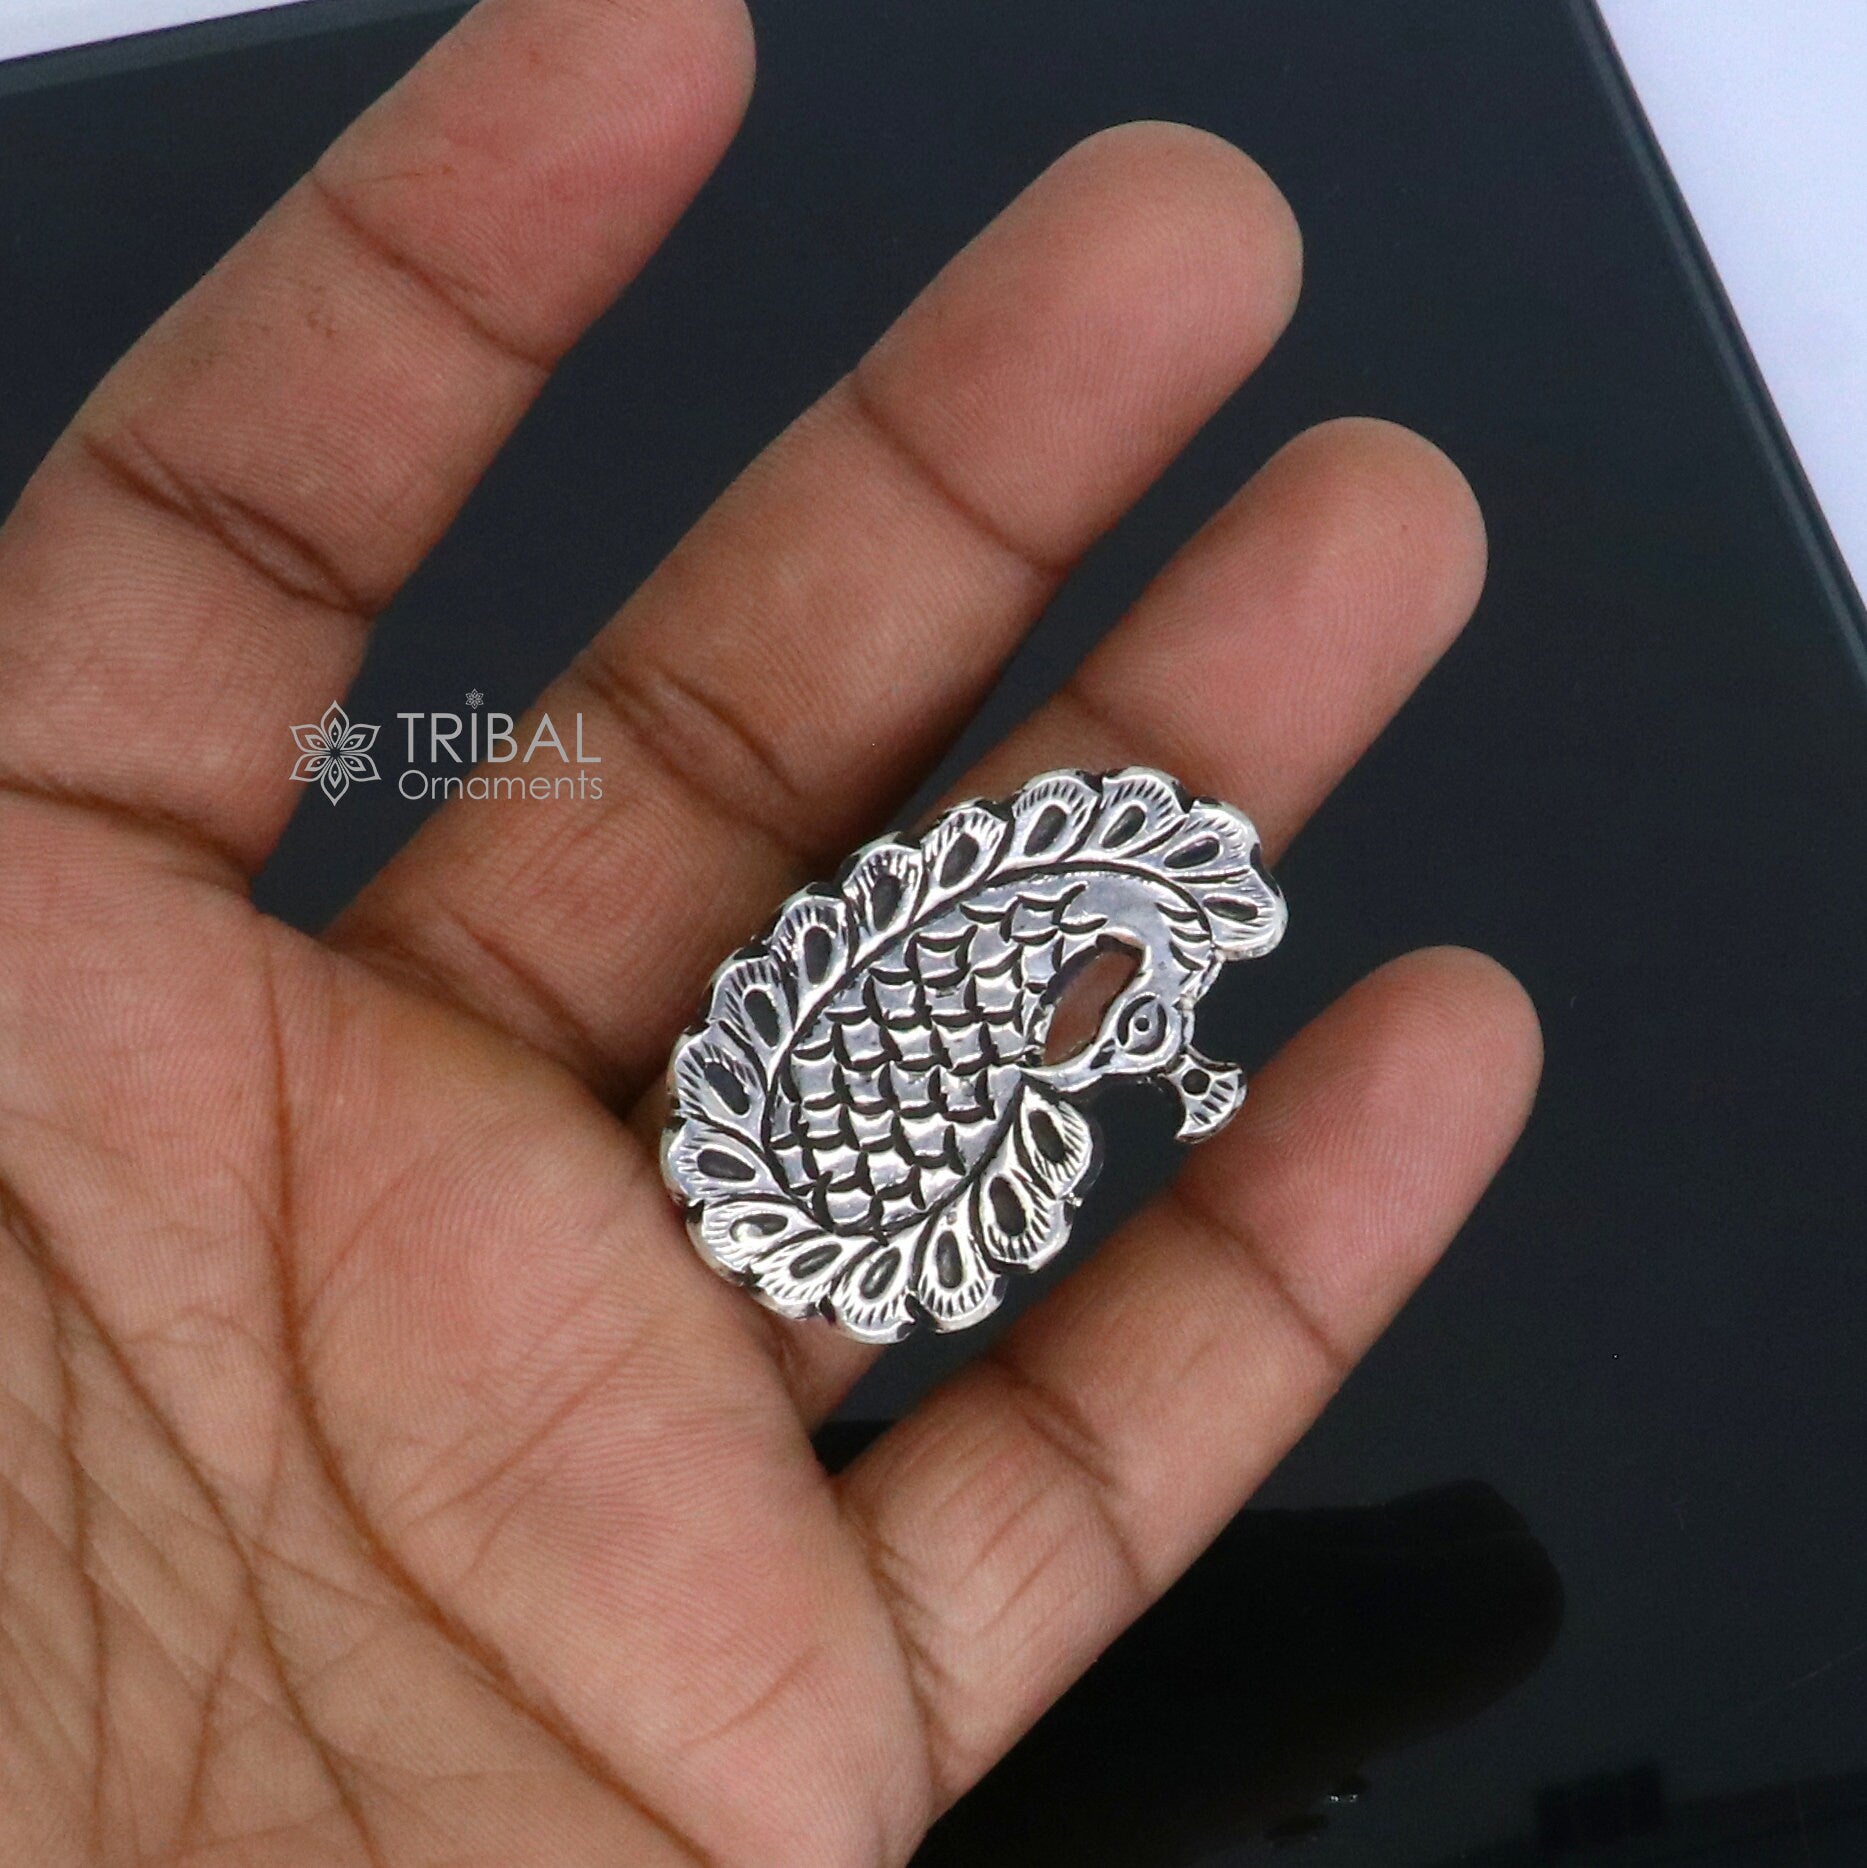 Peacock design Indian Classical cultural 925 sterling silver adjustable ring, best tribal ethnic jewelry Navratri jewelry sr395 - TRIBAL ORNAMENTS